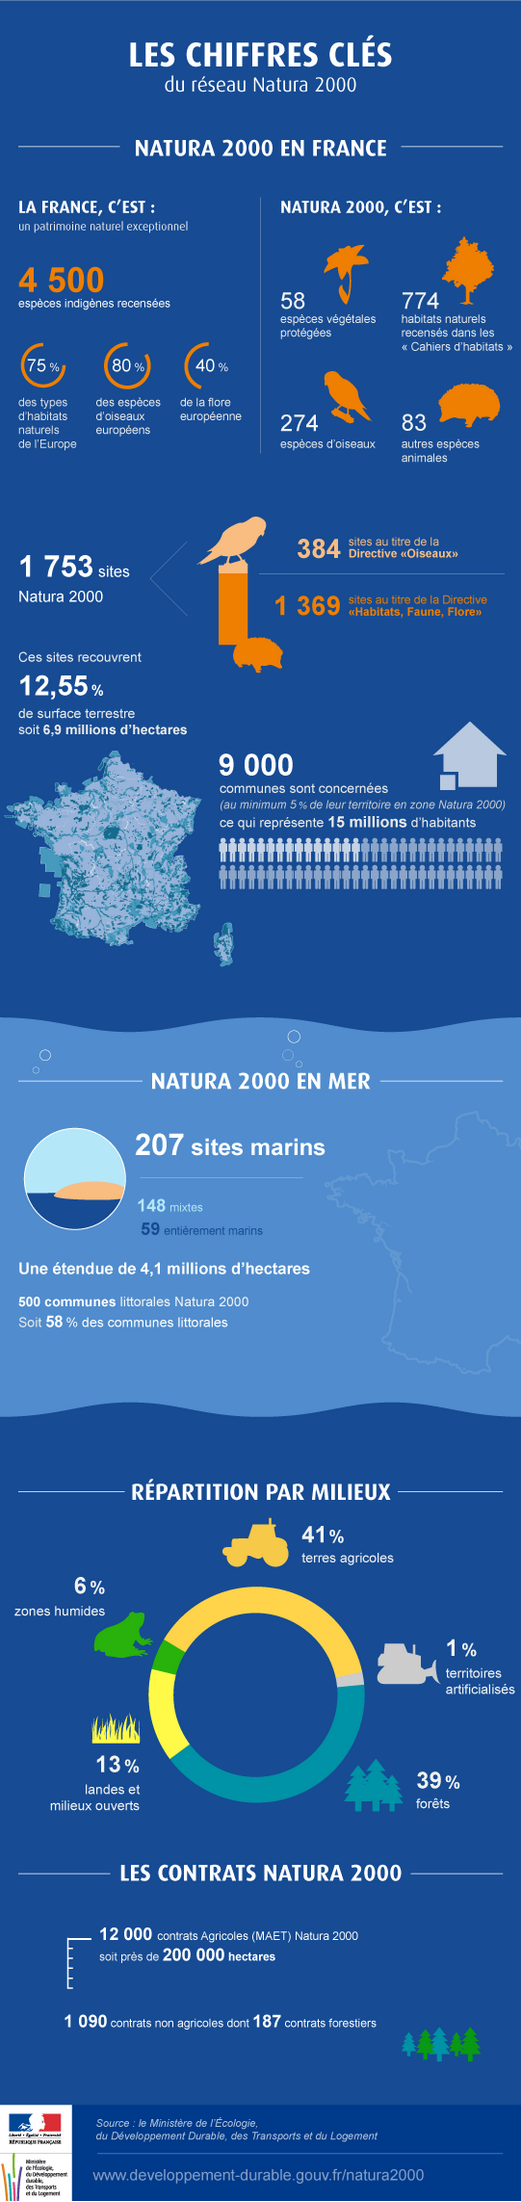 infographie_chiffres_cles_france